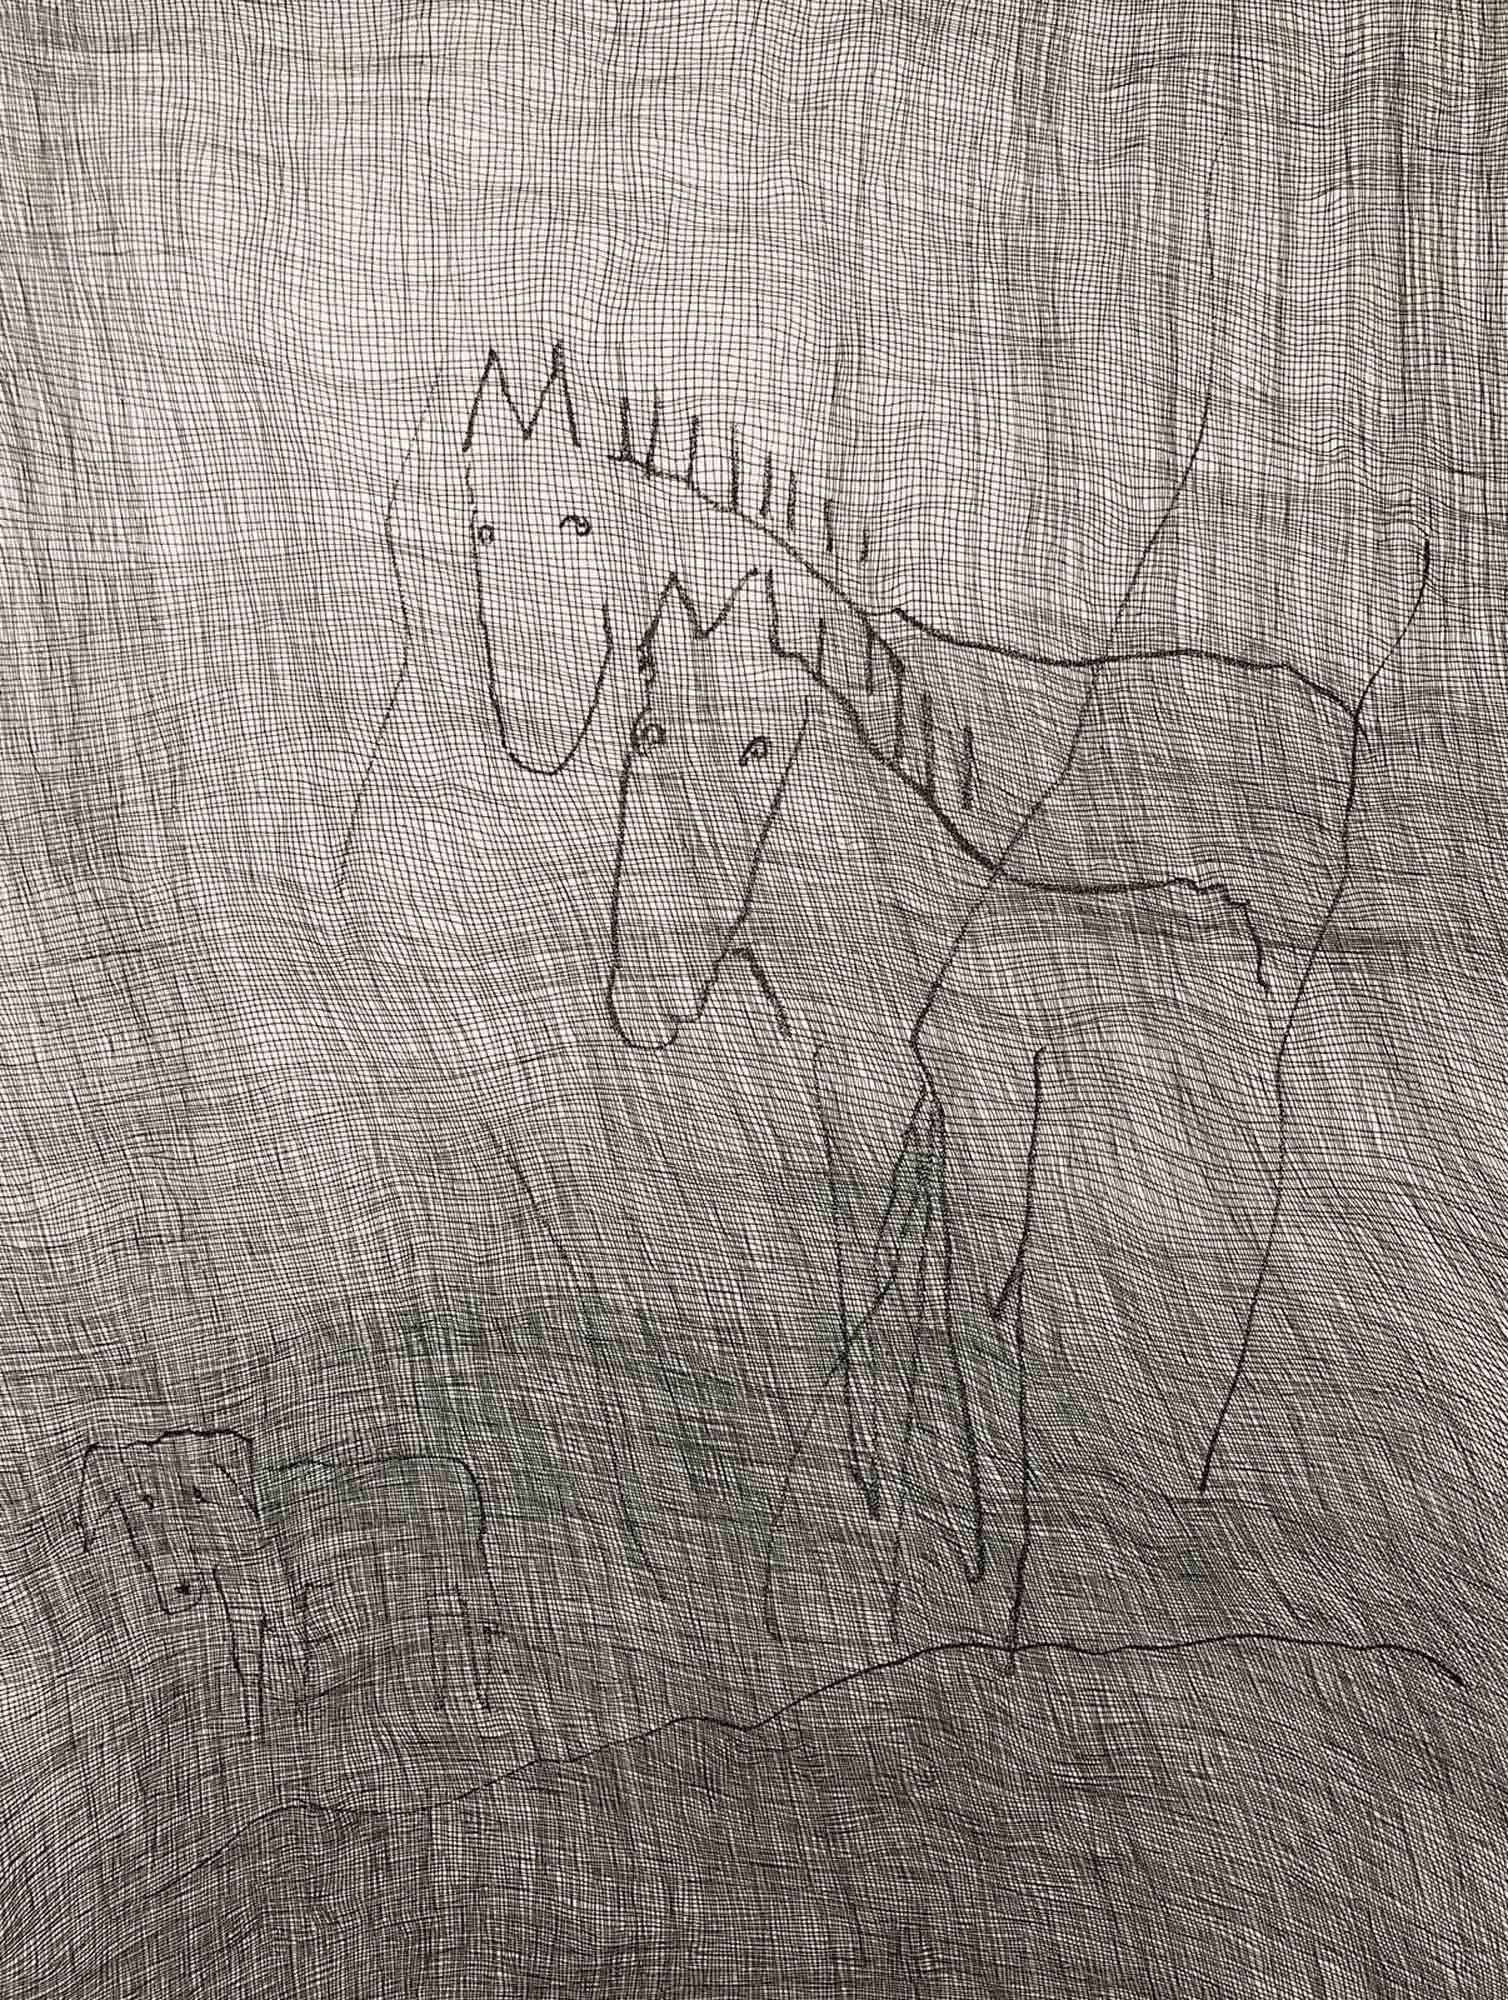 Pen and ink art by Mark Alexander; abstract horses on a textured grid backdrop with subtle shading.